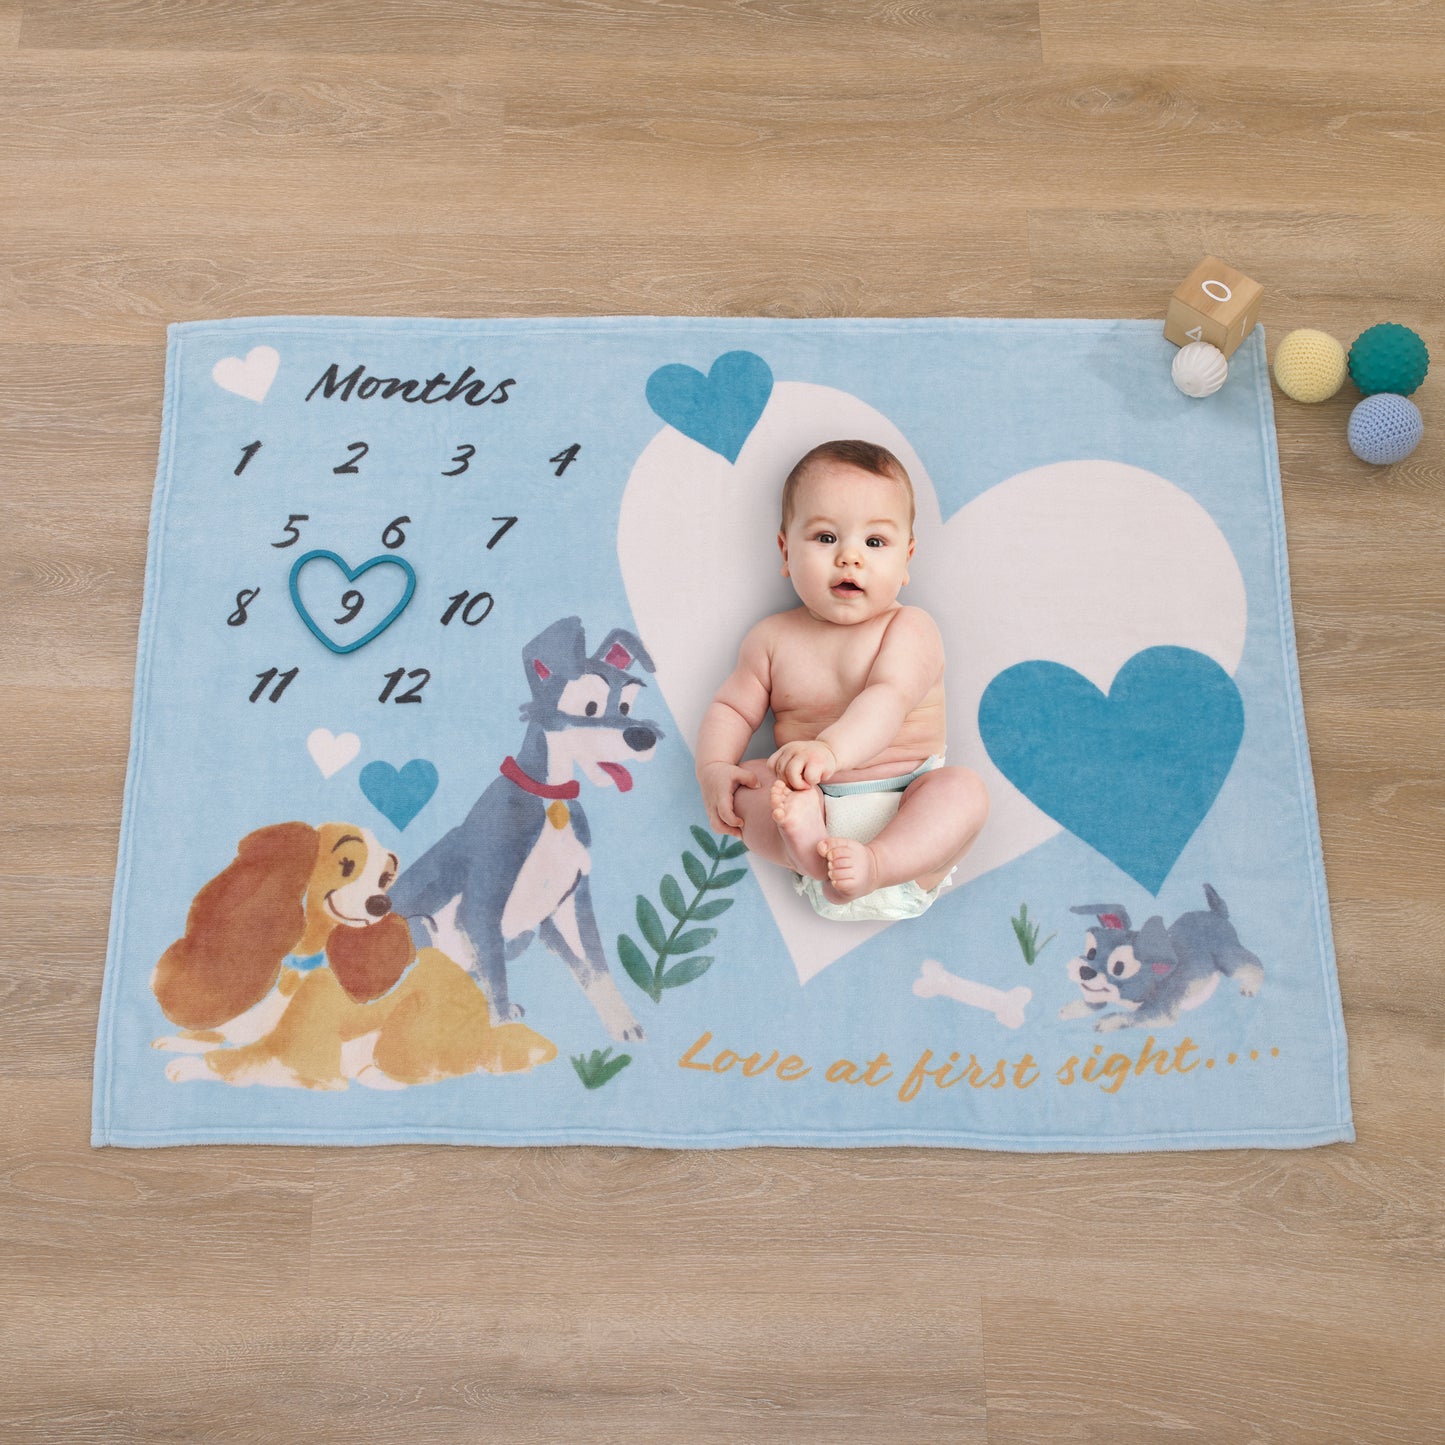 Disney Lady & the Tramp Blue, White, and Gold Love At First Sight Super Soft Photo Op Milestone Baby Blanket